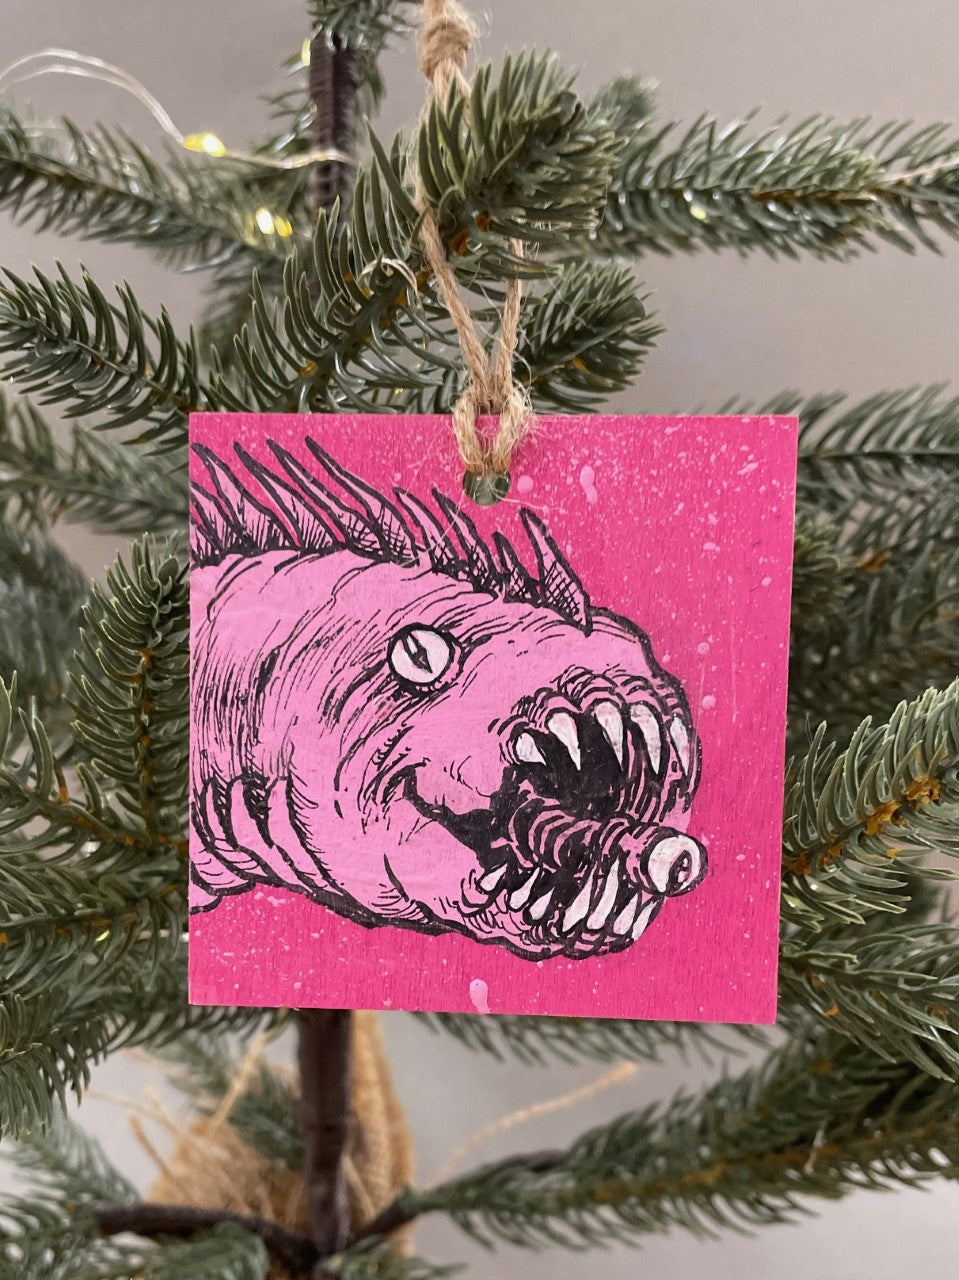 Worm Tongue - MONSTER ORNAMENT - One of a kind hand painted ornament - P01